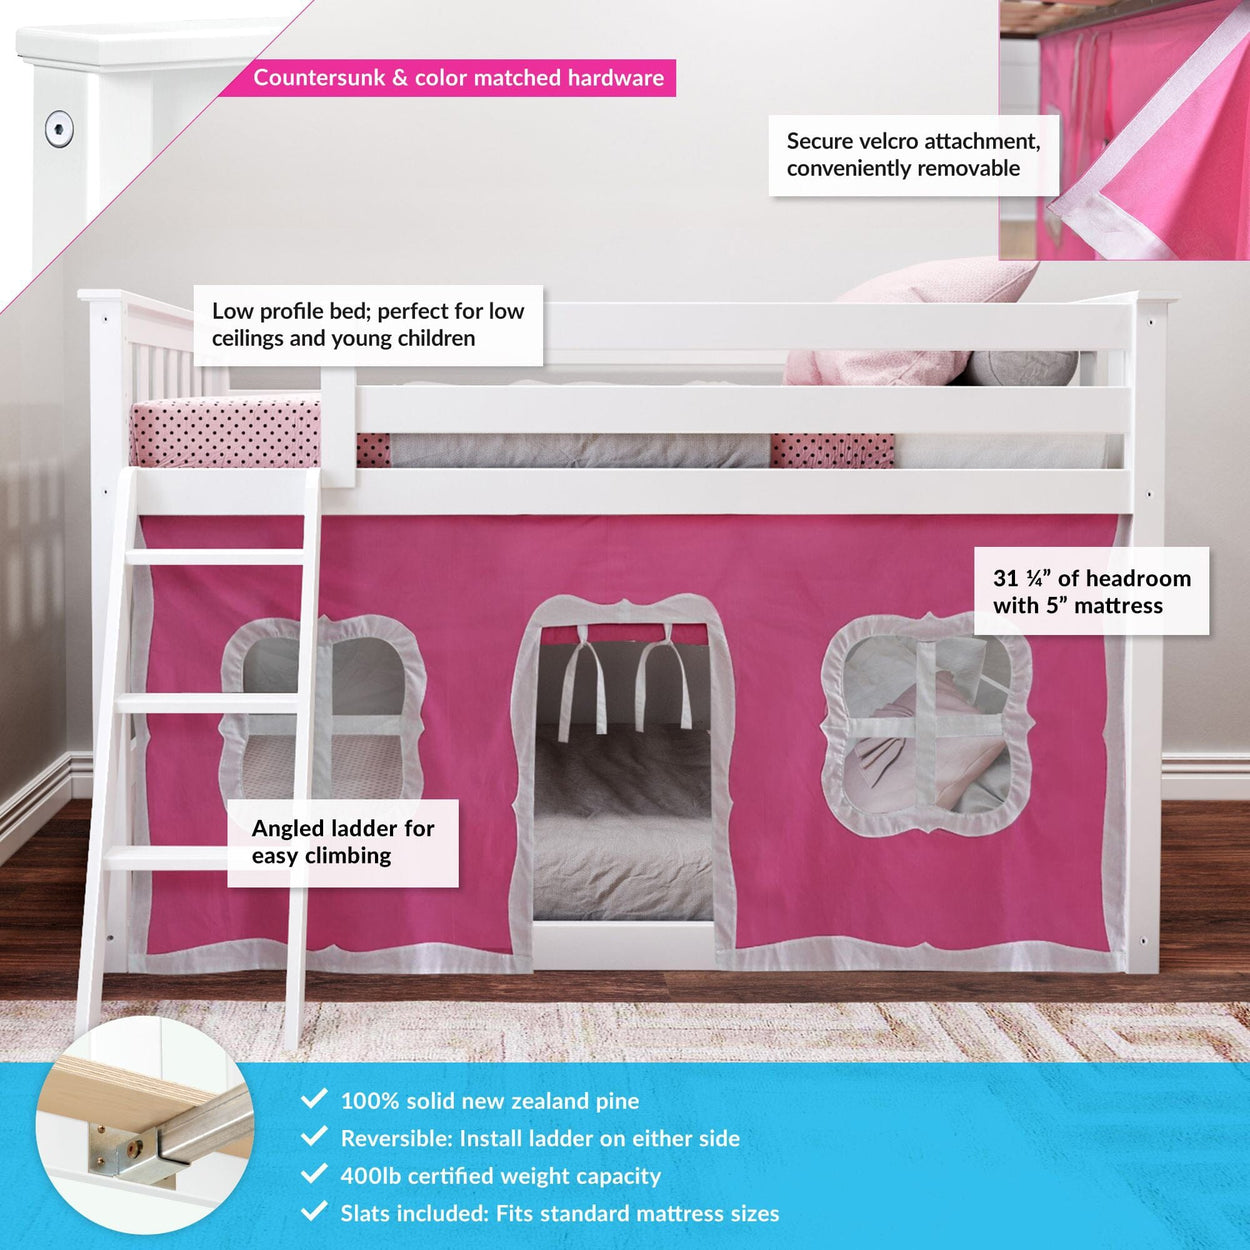 180214002078 : Bunk Beds Twin-Size Low Bunk Bed With Curtain, White + Pink